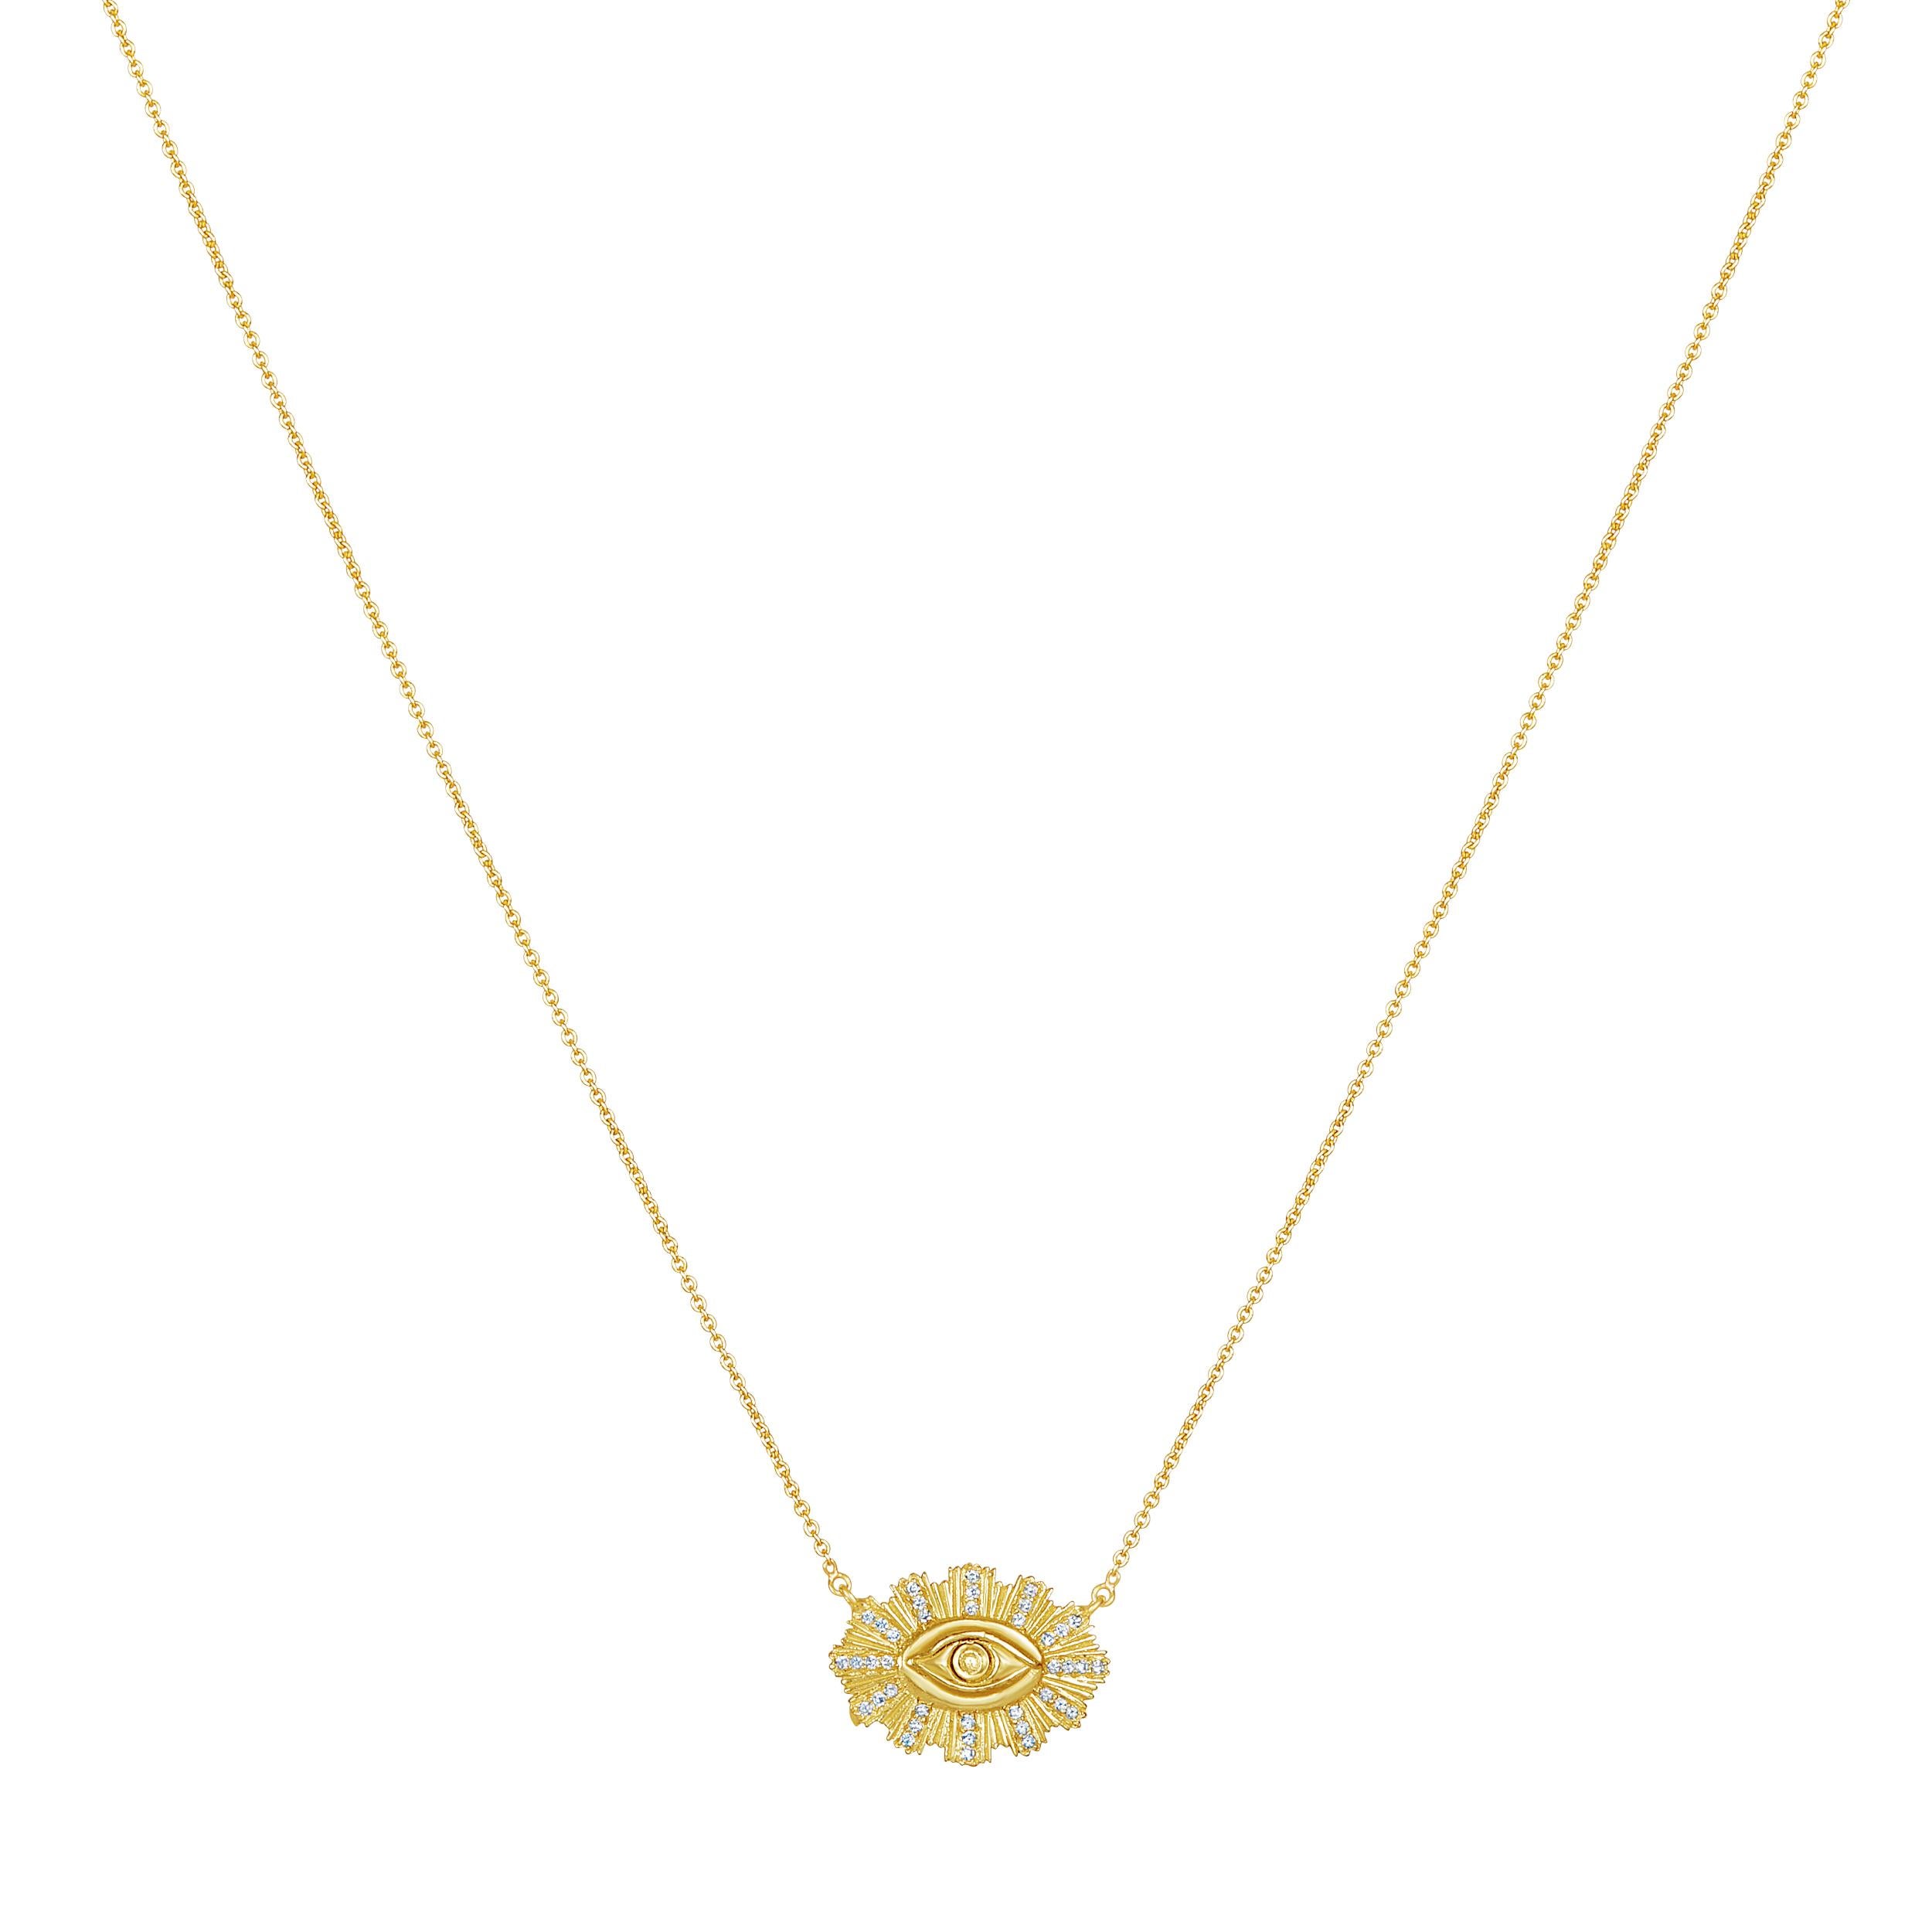 Handcrafted 18kt eye with divine rays and 38 brilliant cut white diamonds set on an 17” trace chain with two optional shorteners

Symbolism:
The eye represents inner-vision, self-awareness and focus on spiritual growth

Materials:
18kt gold &